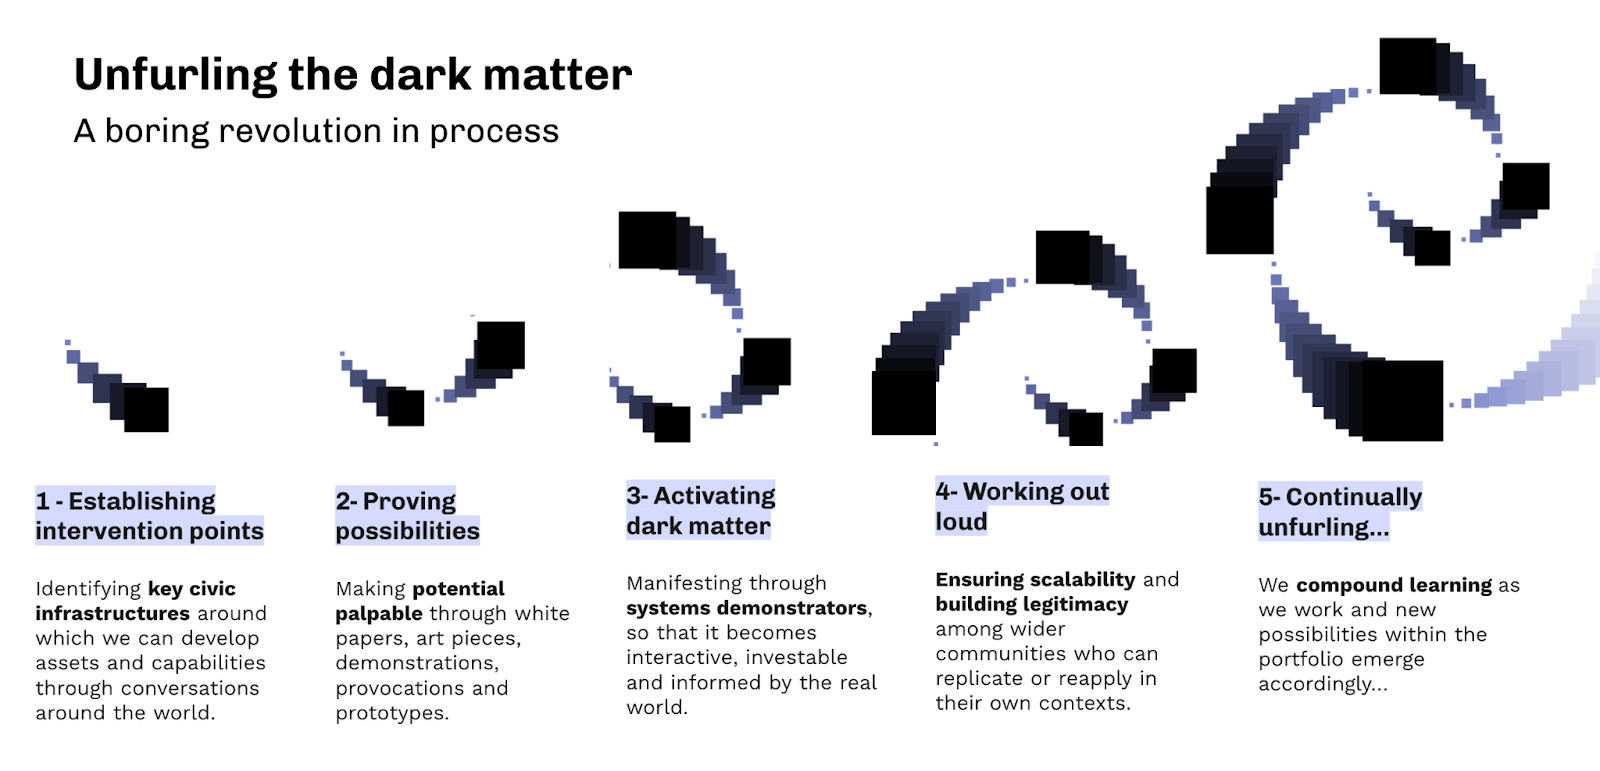 Infographic showing steps in the process of unfurling the dark matter. The steps are: 1 - Establishing intervention points. 2 - Proving possibilities. 3 - Activating dark matter. 4 - Working out loud. 5 - Continually unfurling.